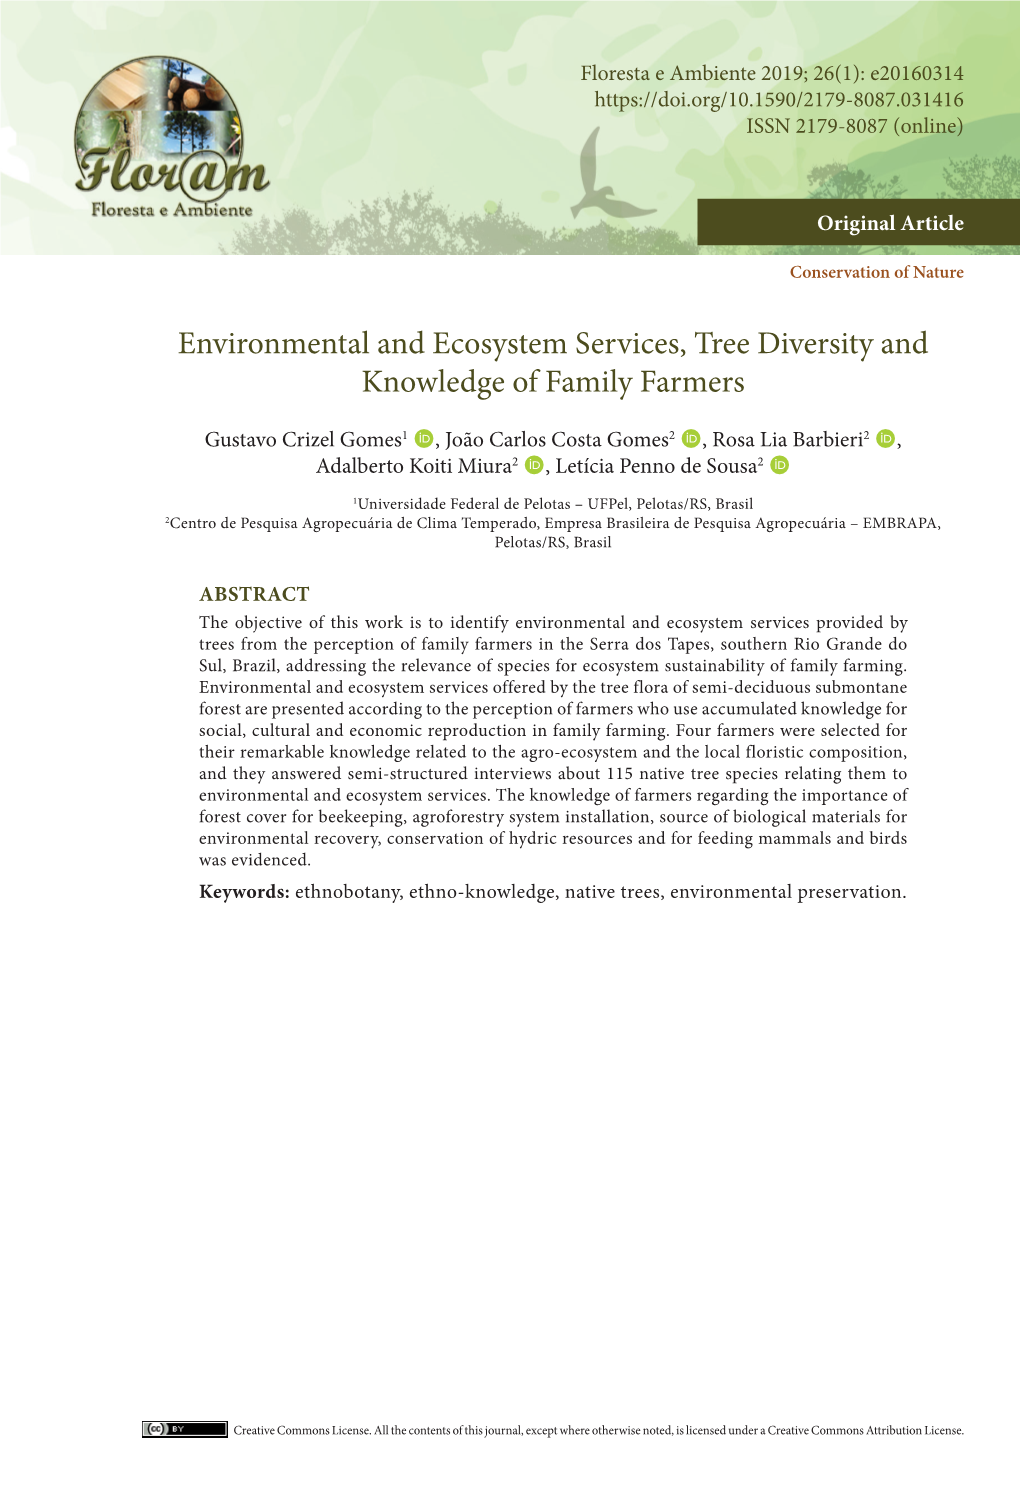 Environmental and Ecosystem Services, Tree Diversity and Knowledge of Family Farmers